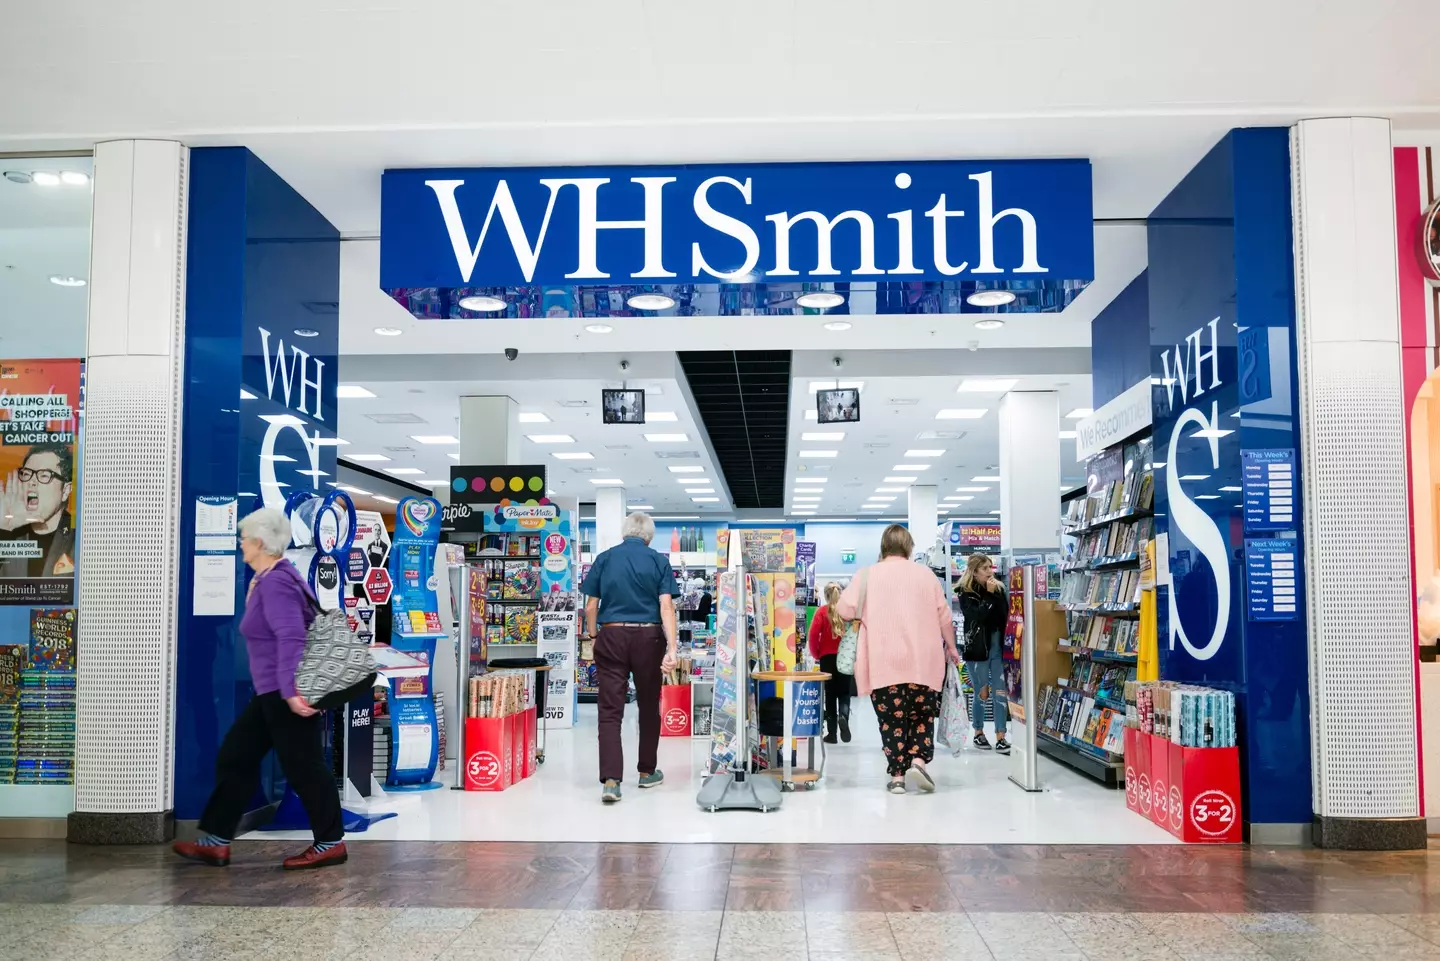 Toys R Us is coming soon to, er, nine WHSmith shops near you.